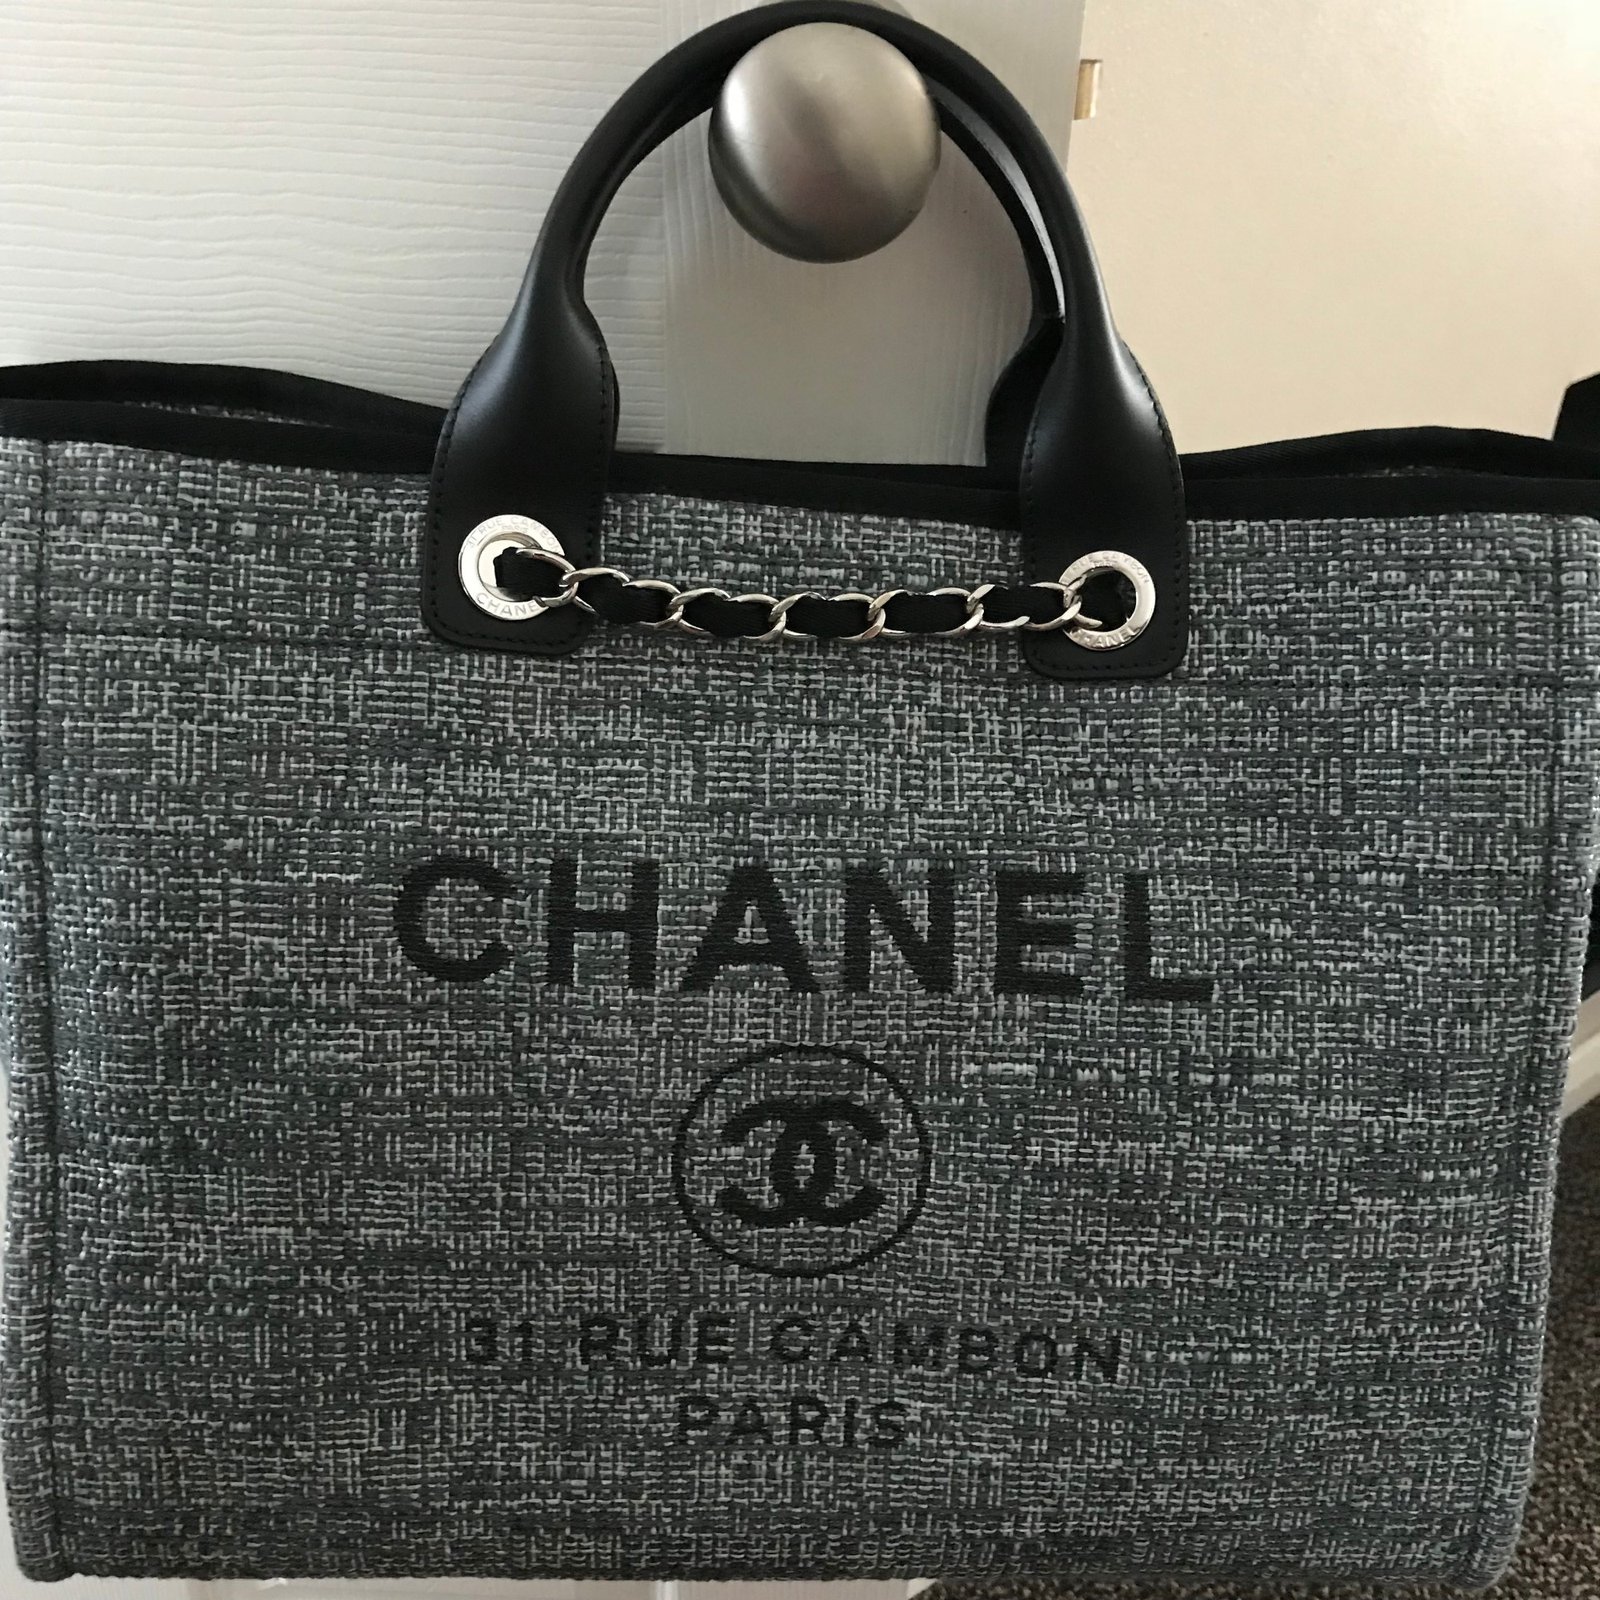 Chanel Chanel Deauville Large Tote Bag NEW 2018 - Grey with Glitter! Handbags Cloth Grey ref ...